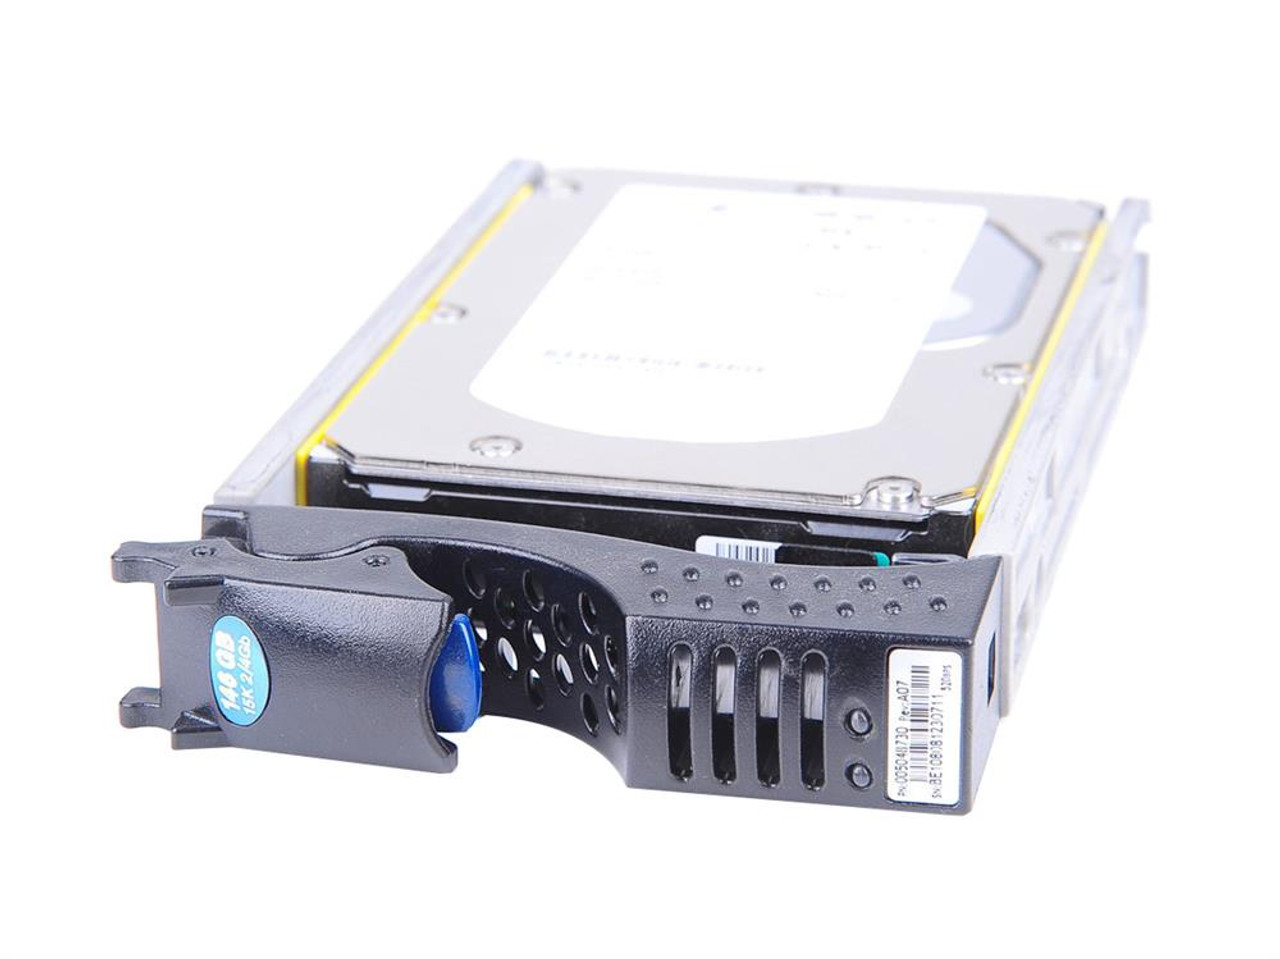 005048730 EMC 146GB 15000RPM Fibre Channel 4Gbps 16MB Cache 3.5-inch Internal Hard Drive with Tray for CLARiiON CX Series Storage Systems